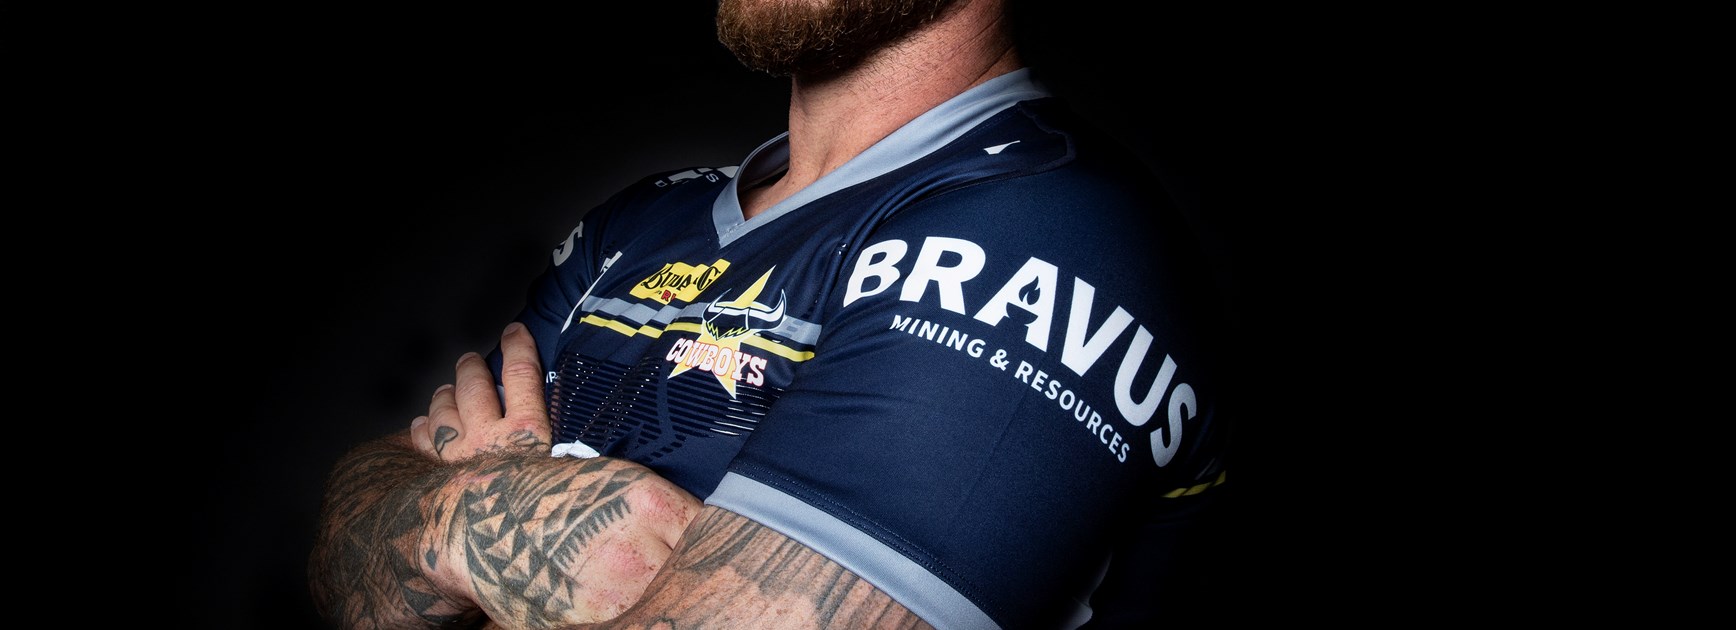 Adani’s new mining brand to feature on Cowboys 2021 jersey